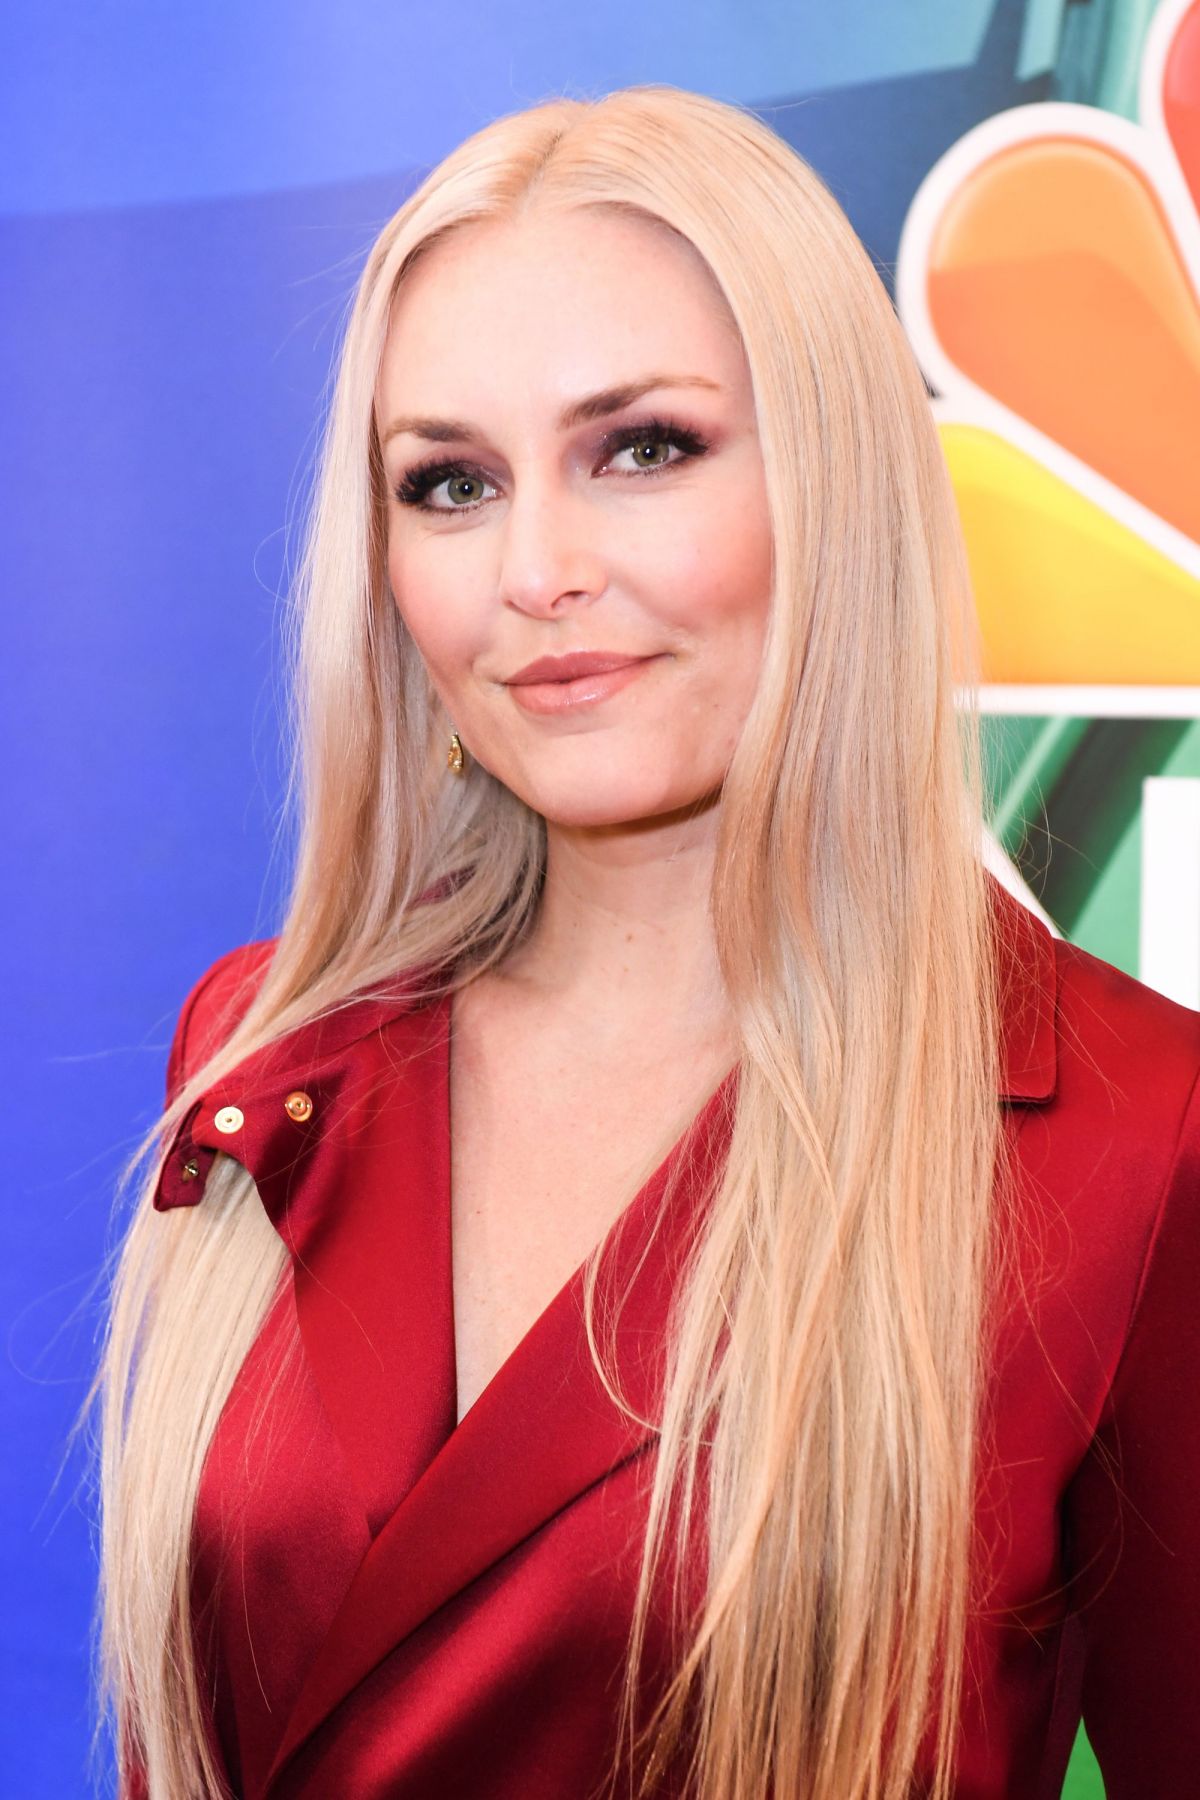 LINDSEY VONN at NBCUniversal Upfront Presentation in New York 05/13/2019 - HawtCelebs